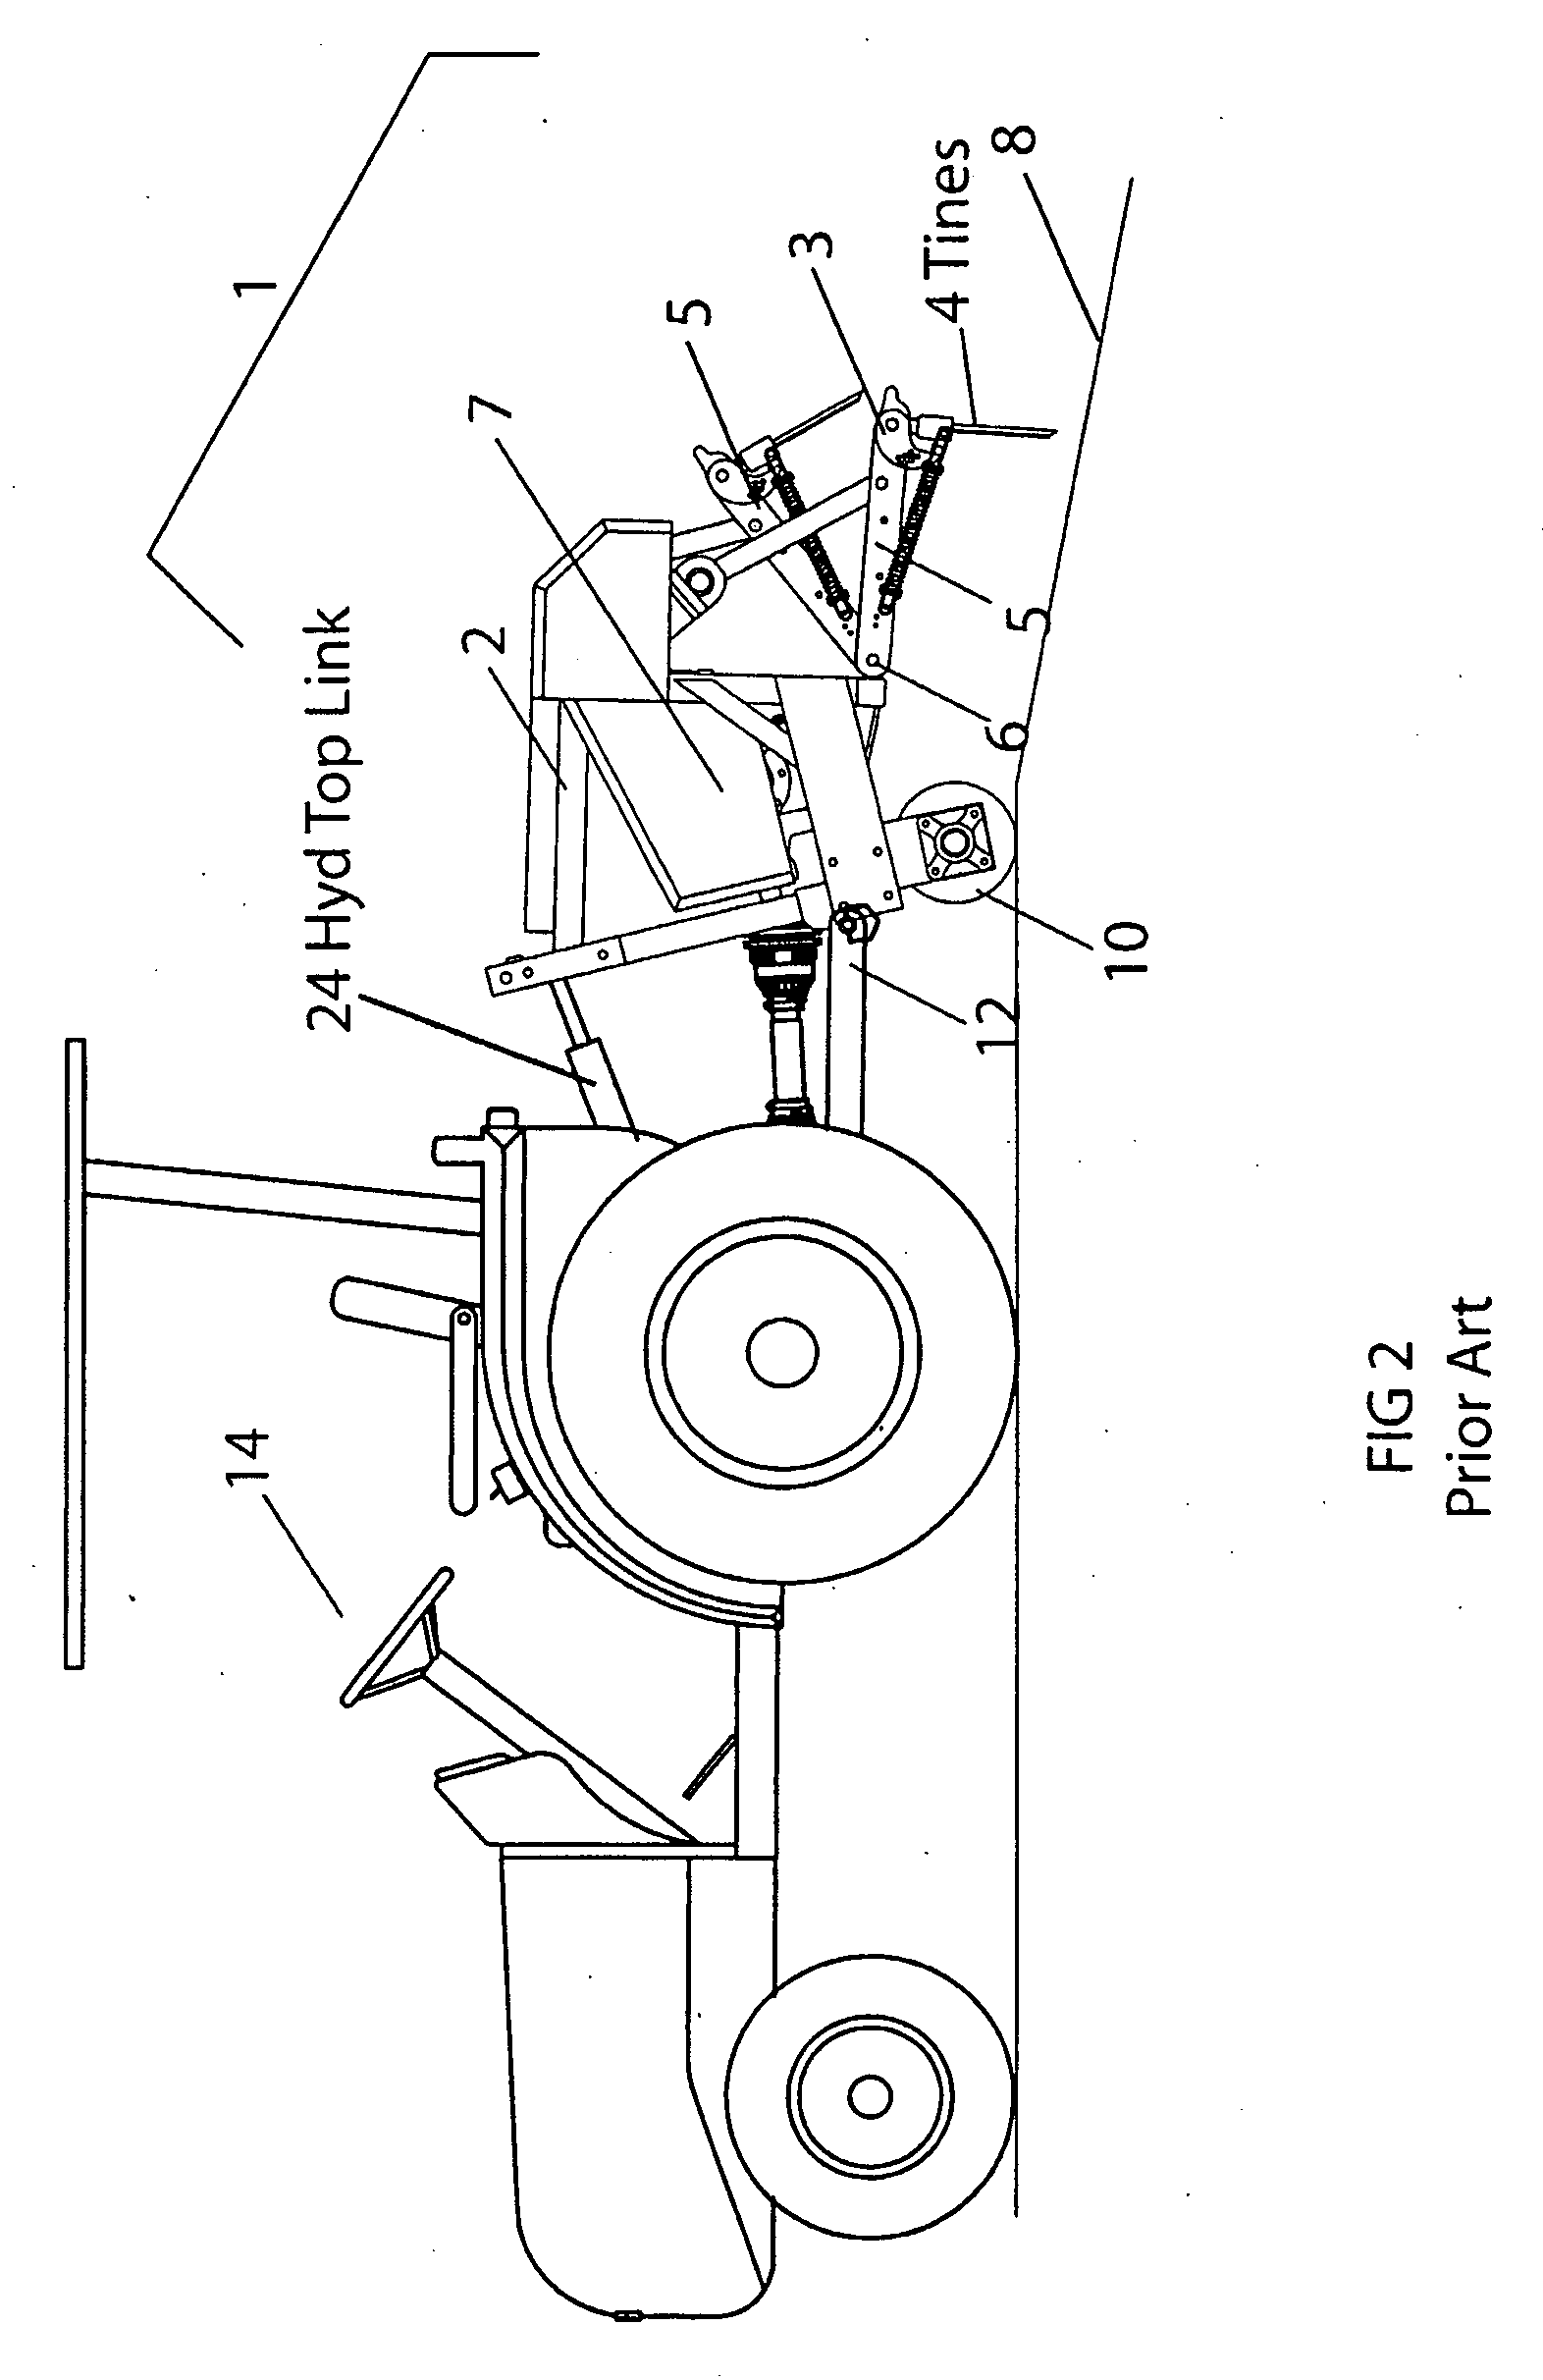 Frame Orientation Control Device for an Aeration Apparatus